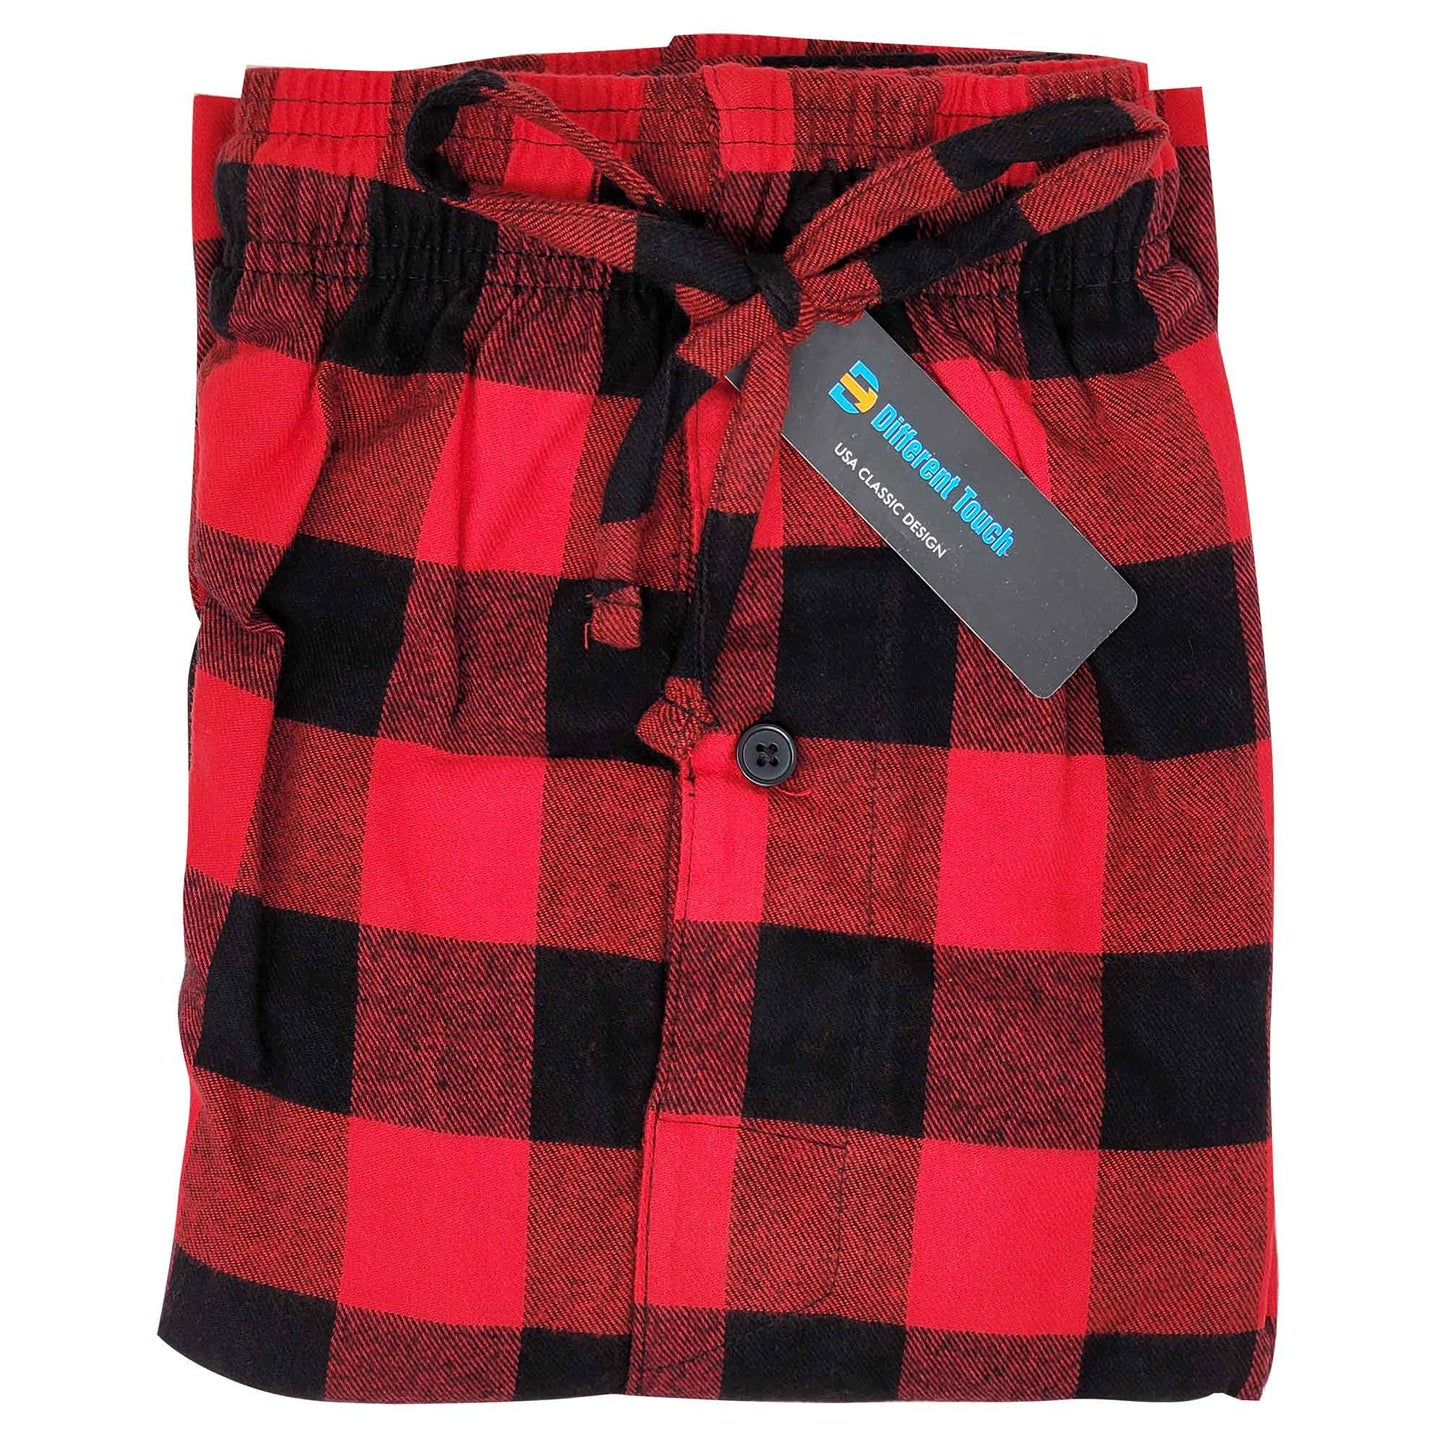 Cotton Lounge Pajama Pants for Men | Red Buffalo Plaid S-6XL | Different Touch